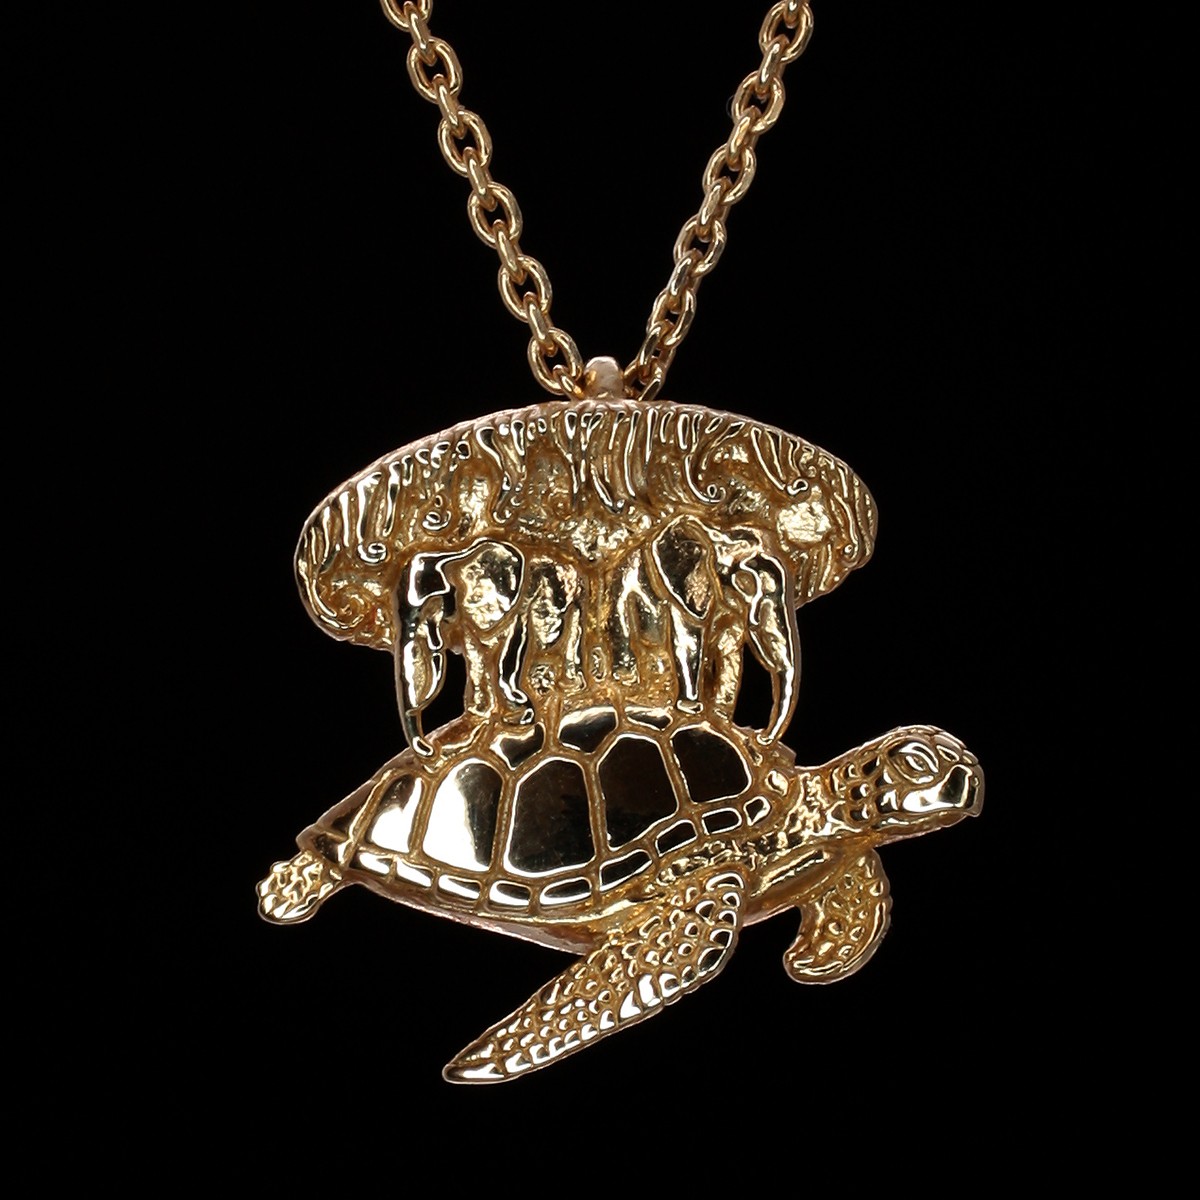 The Great A'Tuin Necklace